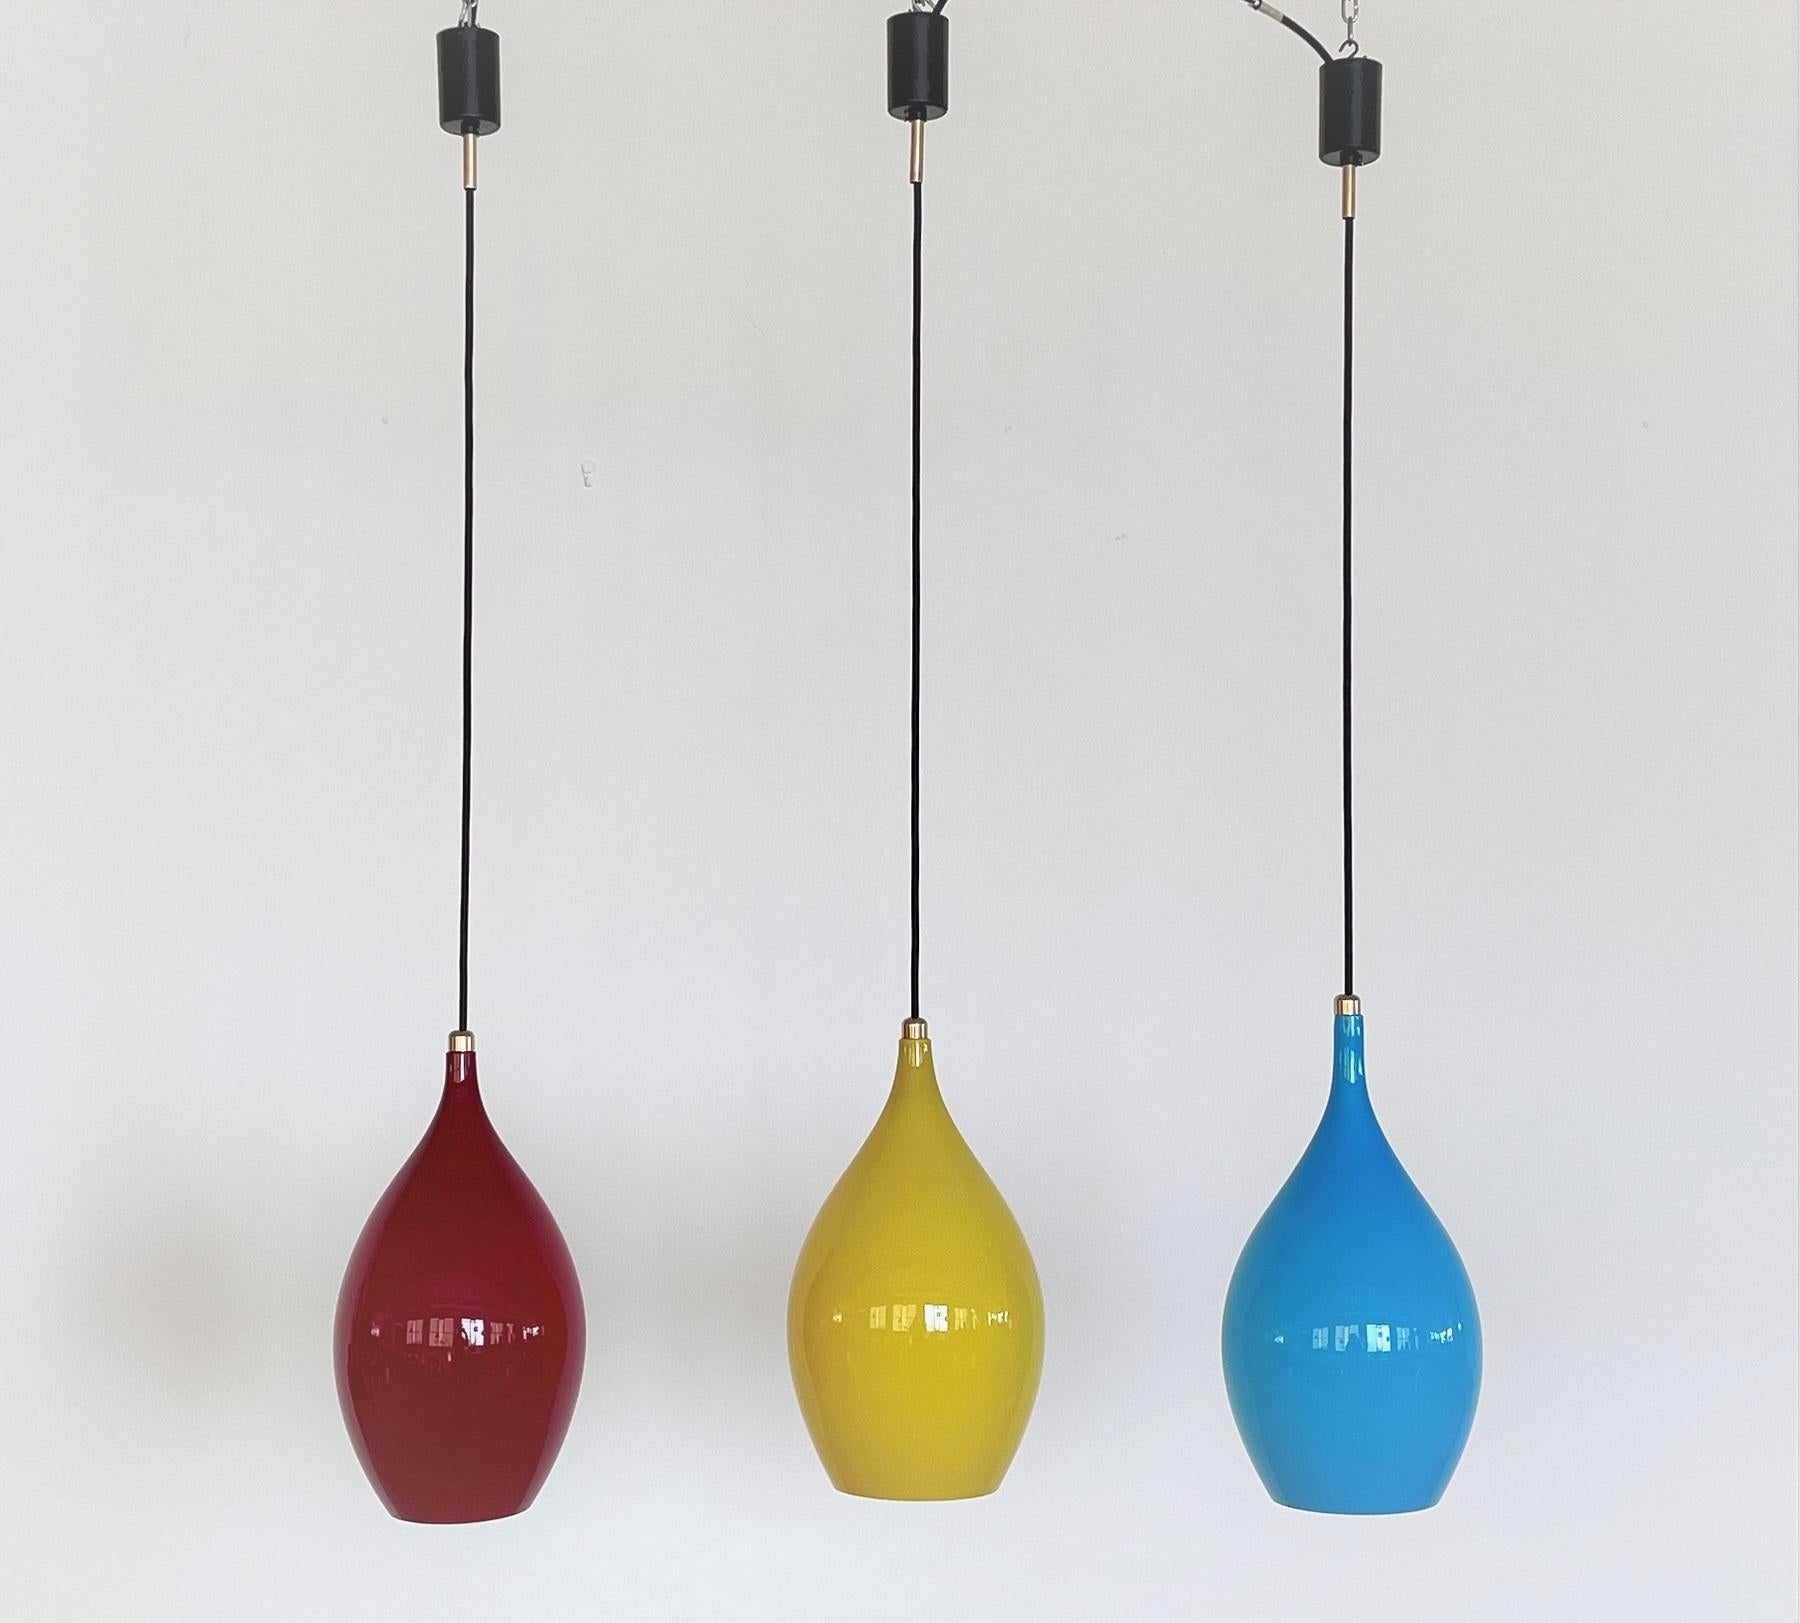 Hand-Crafted Italian Mid-Century Murano Glass Pendants in Red Blue and Yellow by Vistosi, 70s